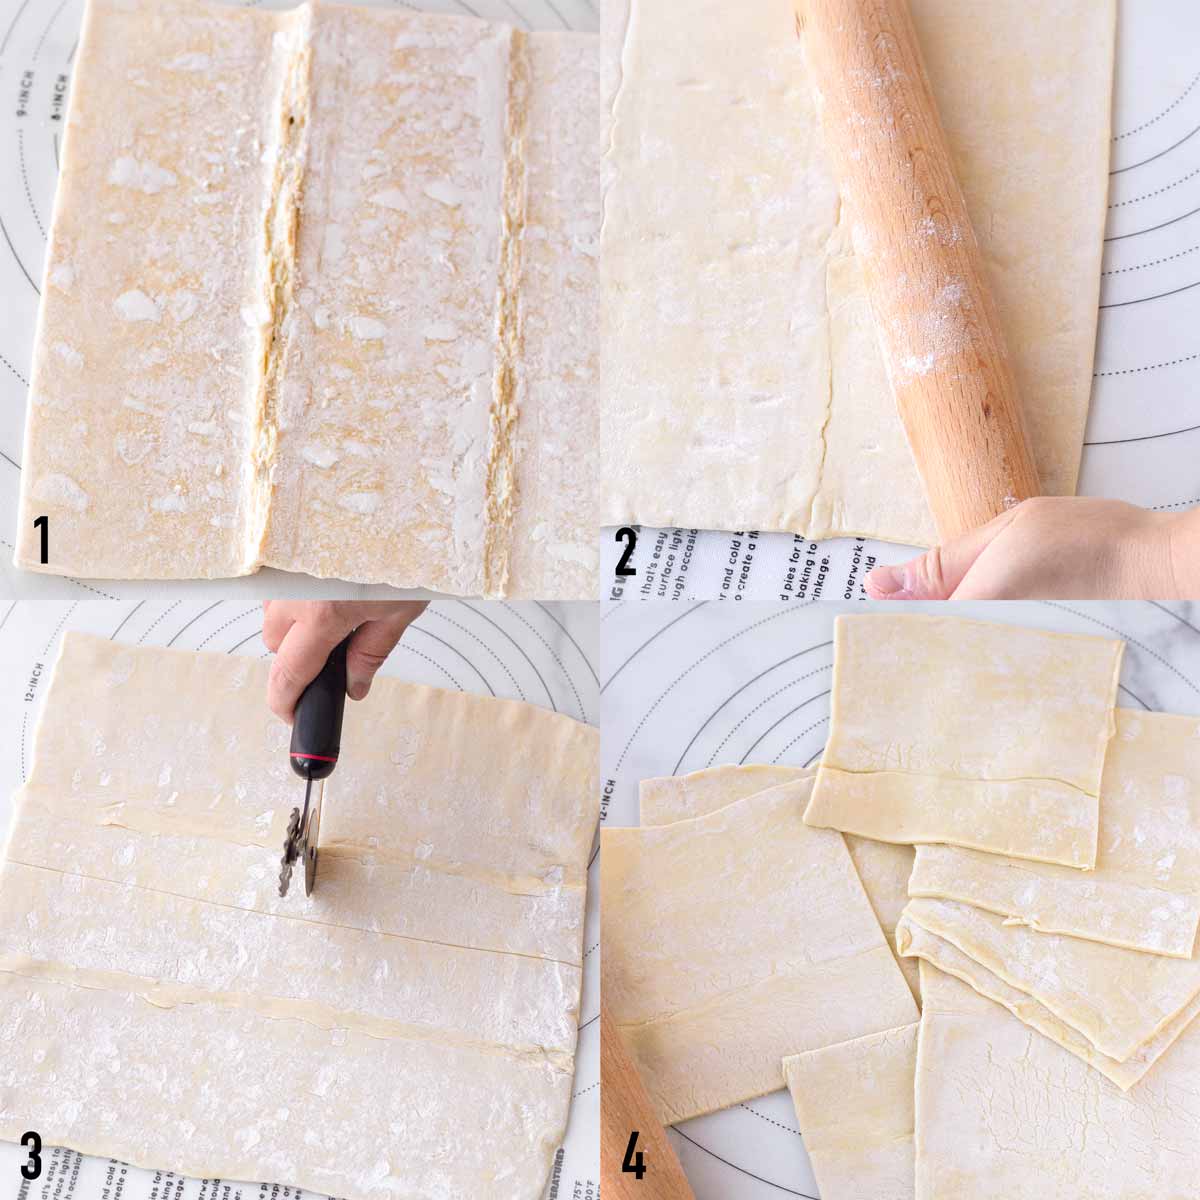 cutting puff pastry dough into squares